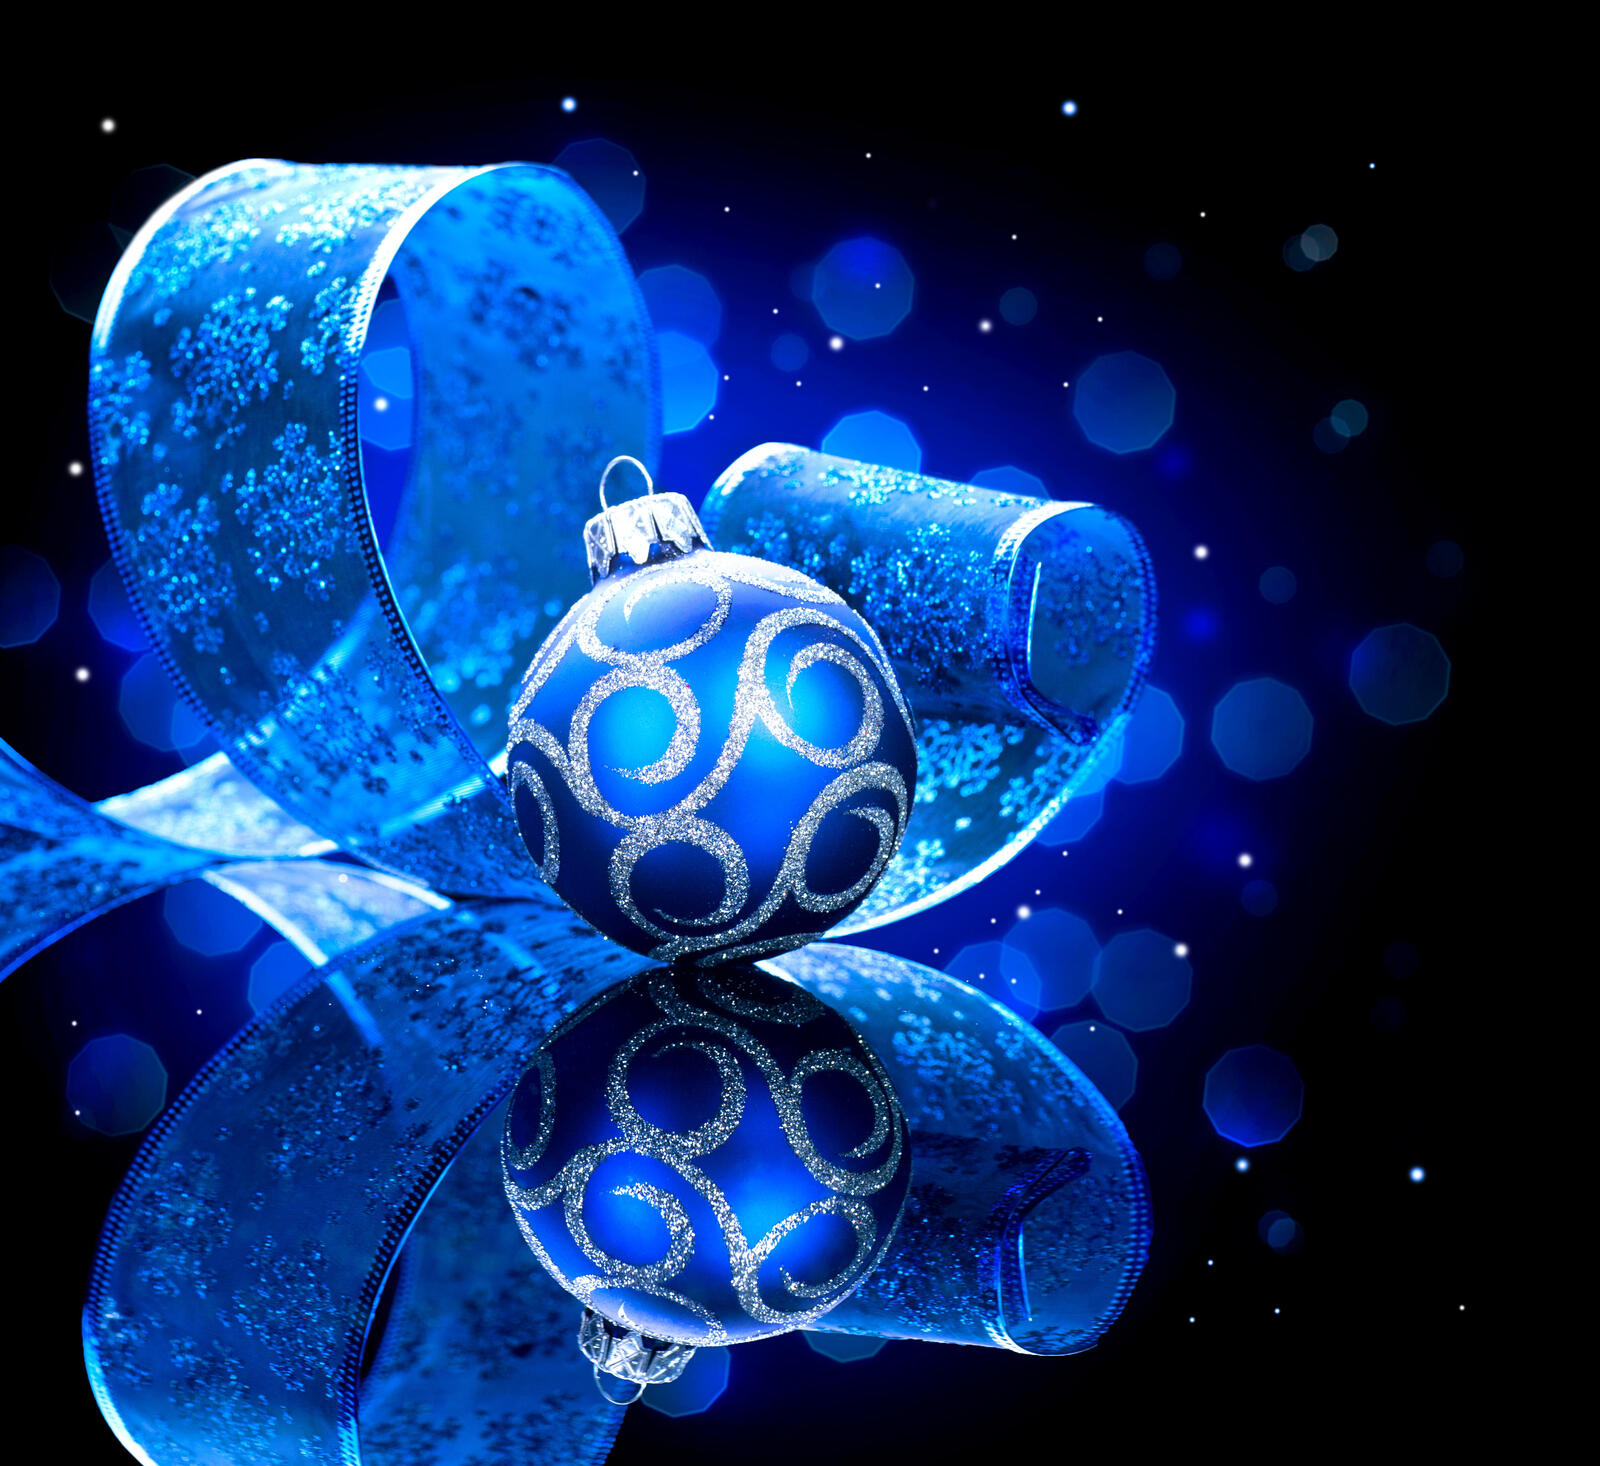 Wallpapers elements toys Christmas tree on the desktop